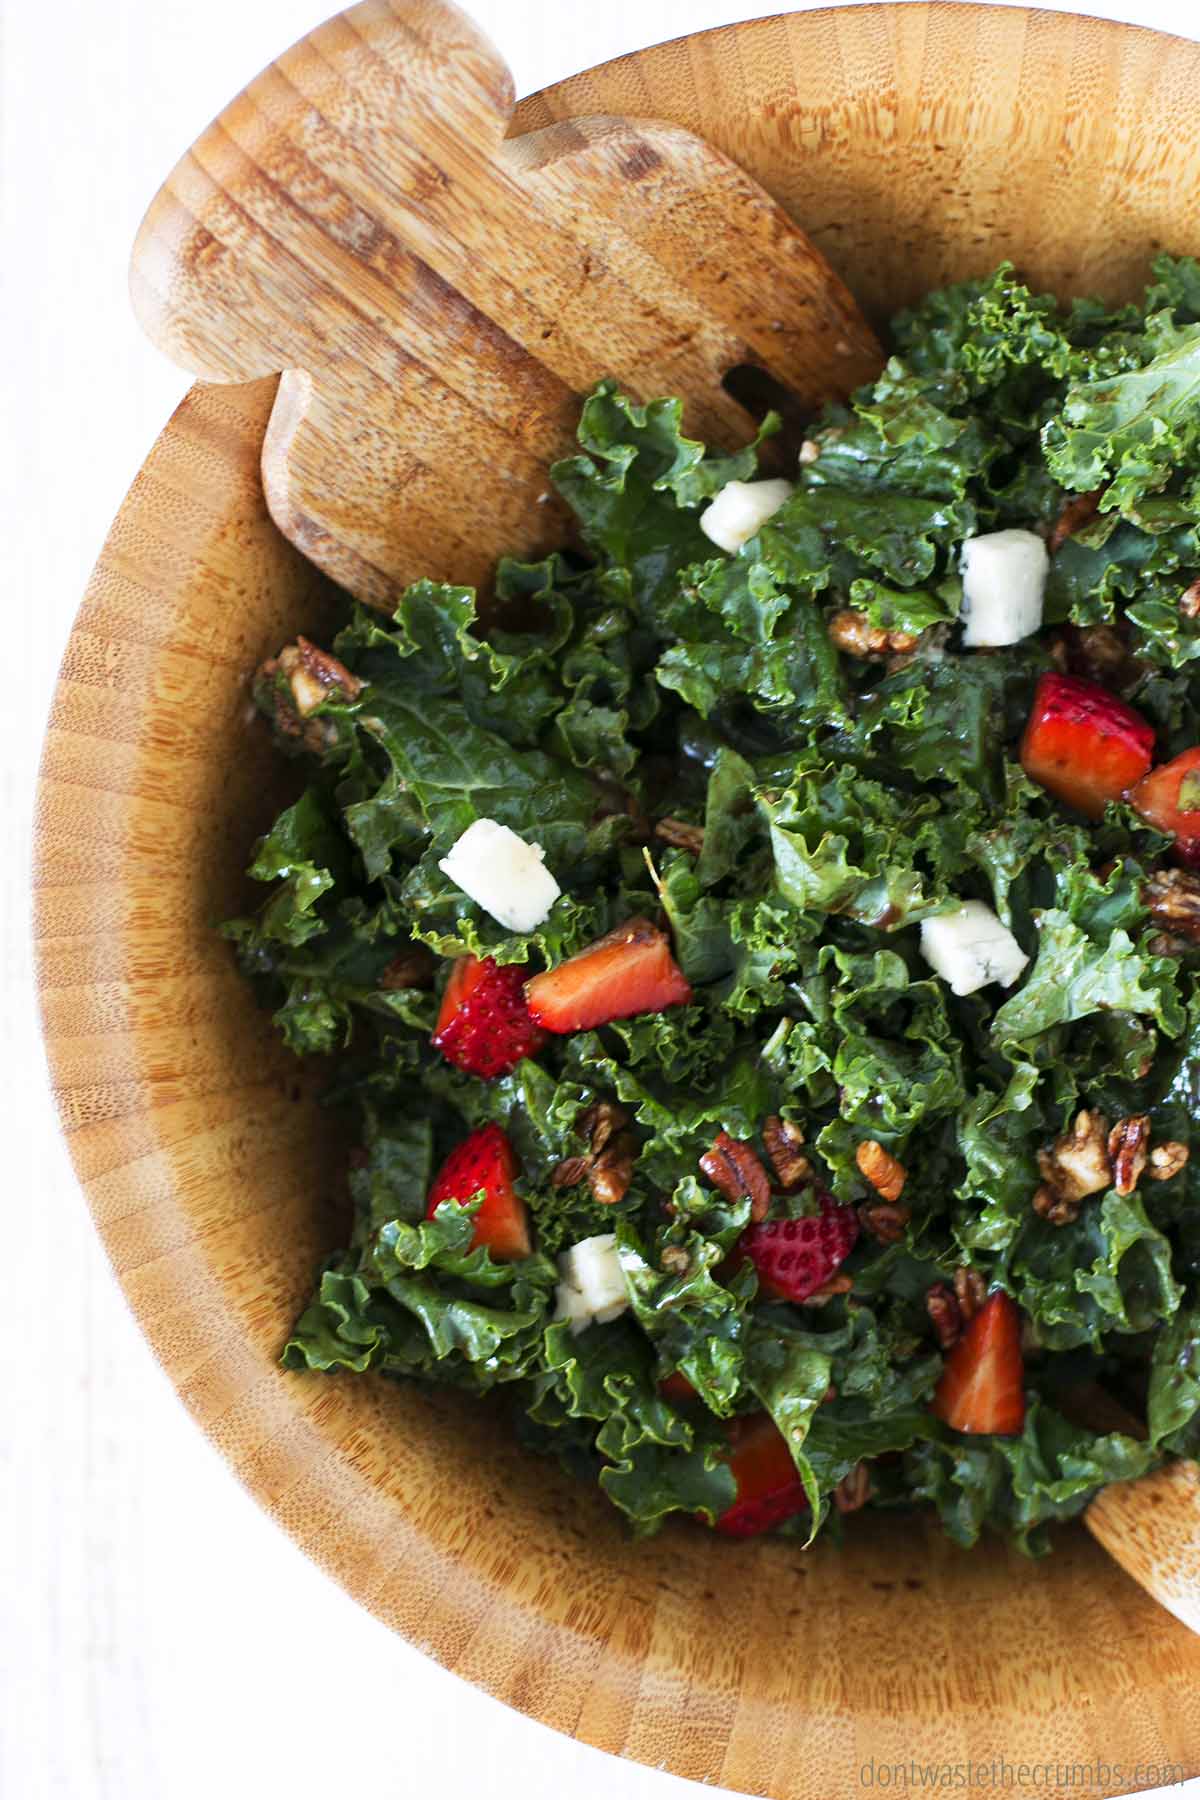 Kale salad recipe with strawberries, pecans and blue cheese in a wooden bowl, ready to be served.